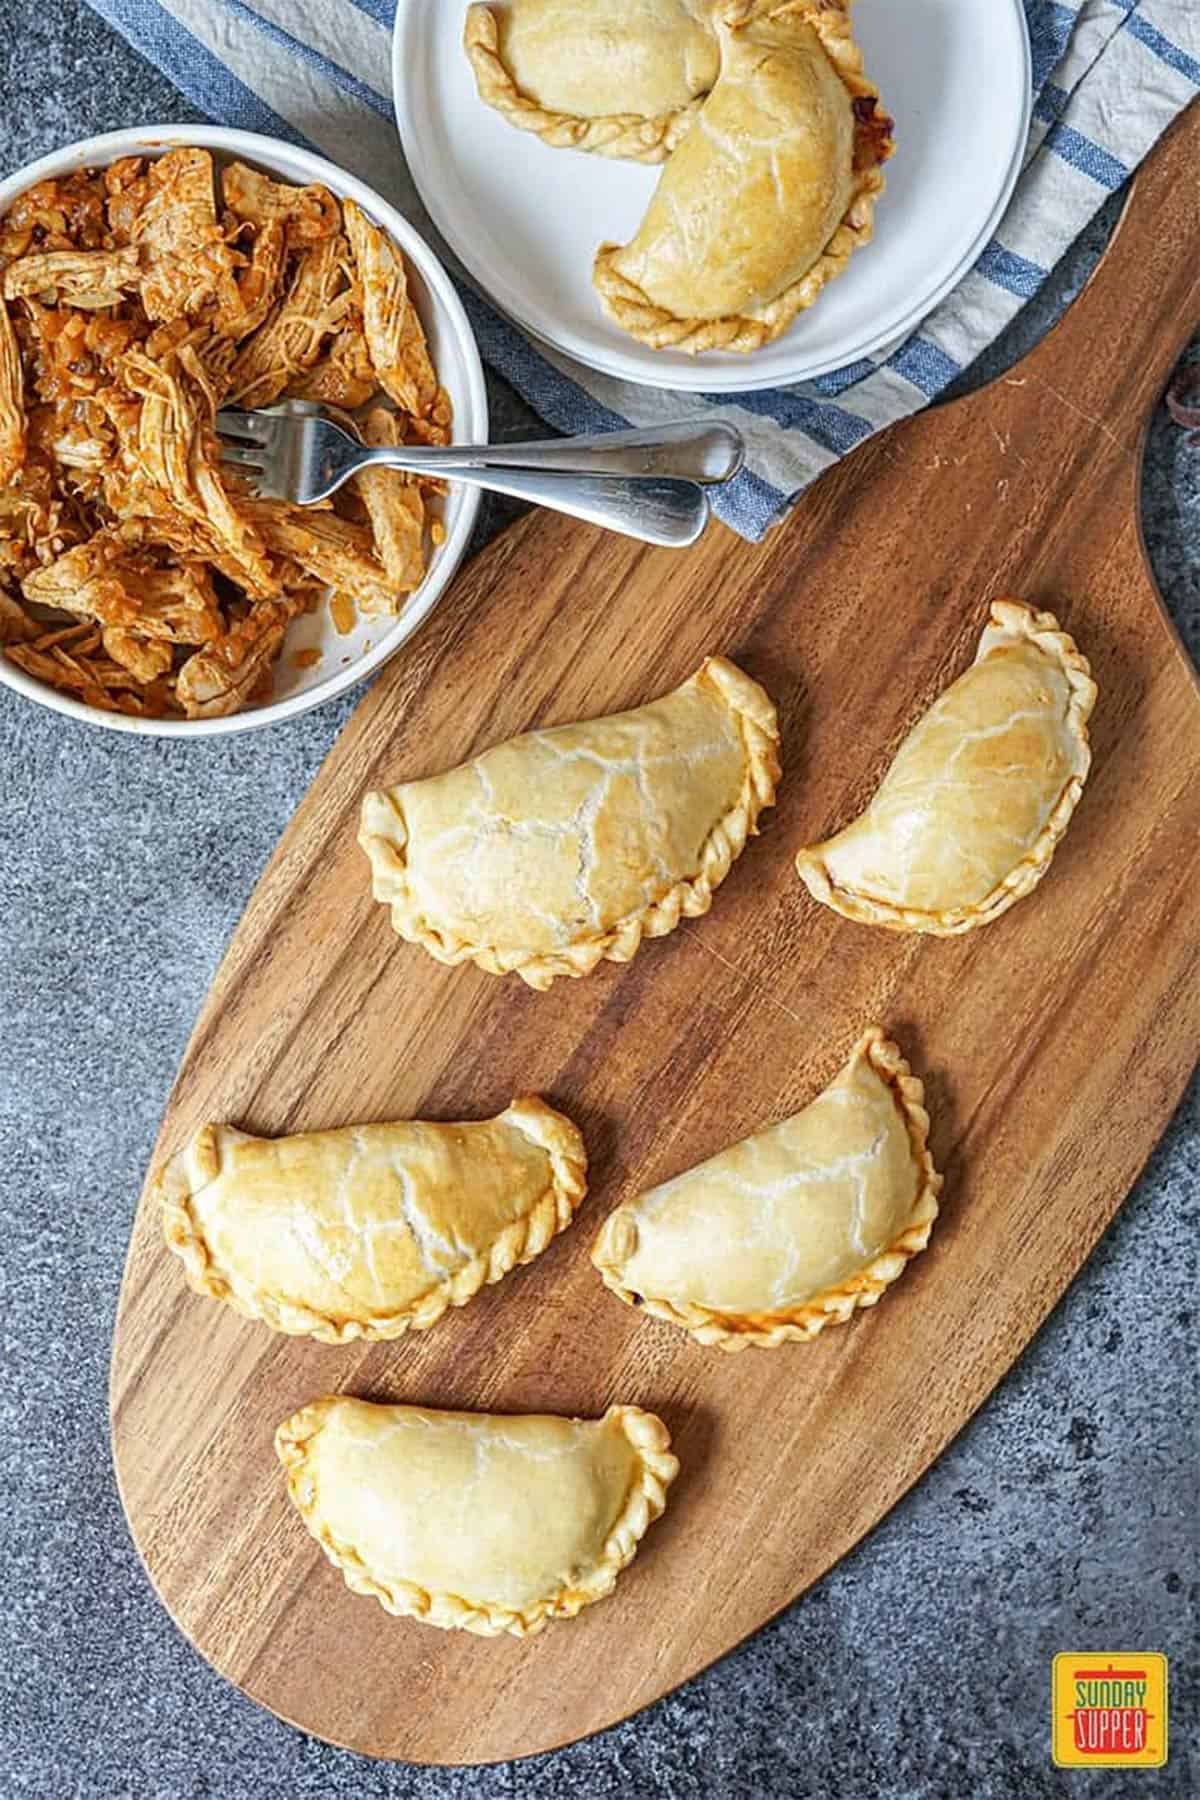 Baked chicken empanadas on a wooden serving board next to a bowl of shredded chicken filling